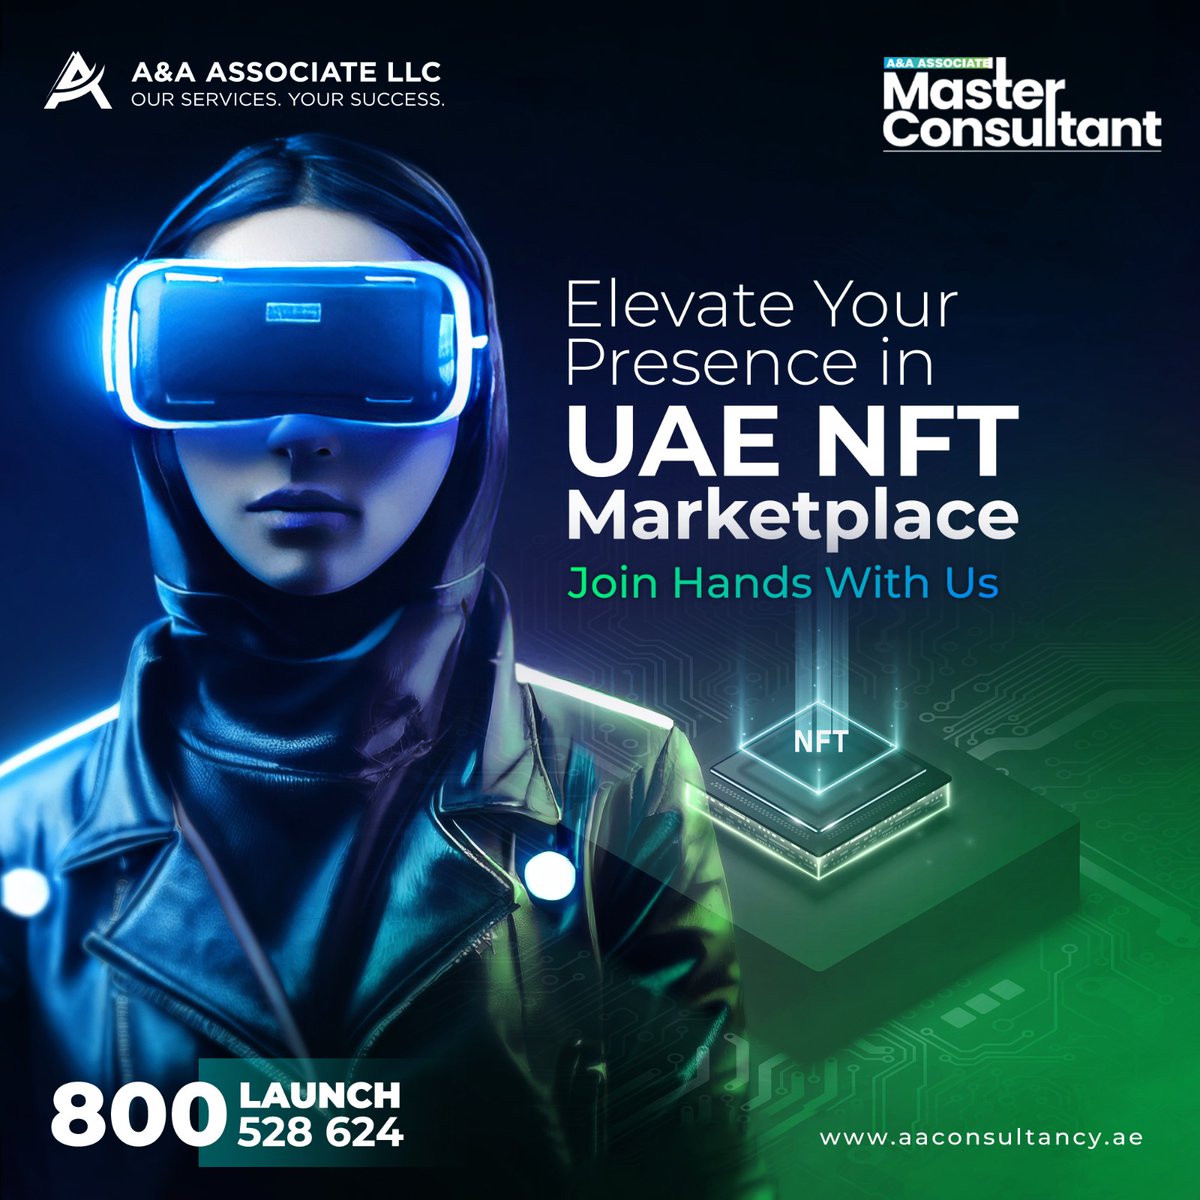 Establish yourself at the forefront of the UAE NFT marketplace! Partner with A&A Associate for a powerful collaboration.
.
.
.
.
#UAENFTMarketplace #NFTs #AandAAssociate #CollaborationOpportunity #DigitalAssets #BlockchainTechnology #UAENFTMarketplace #AAAssociate